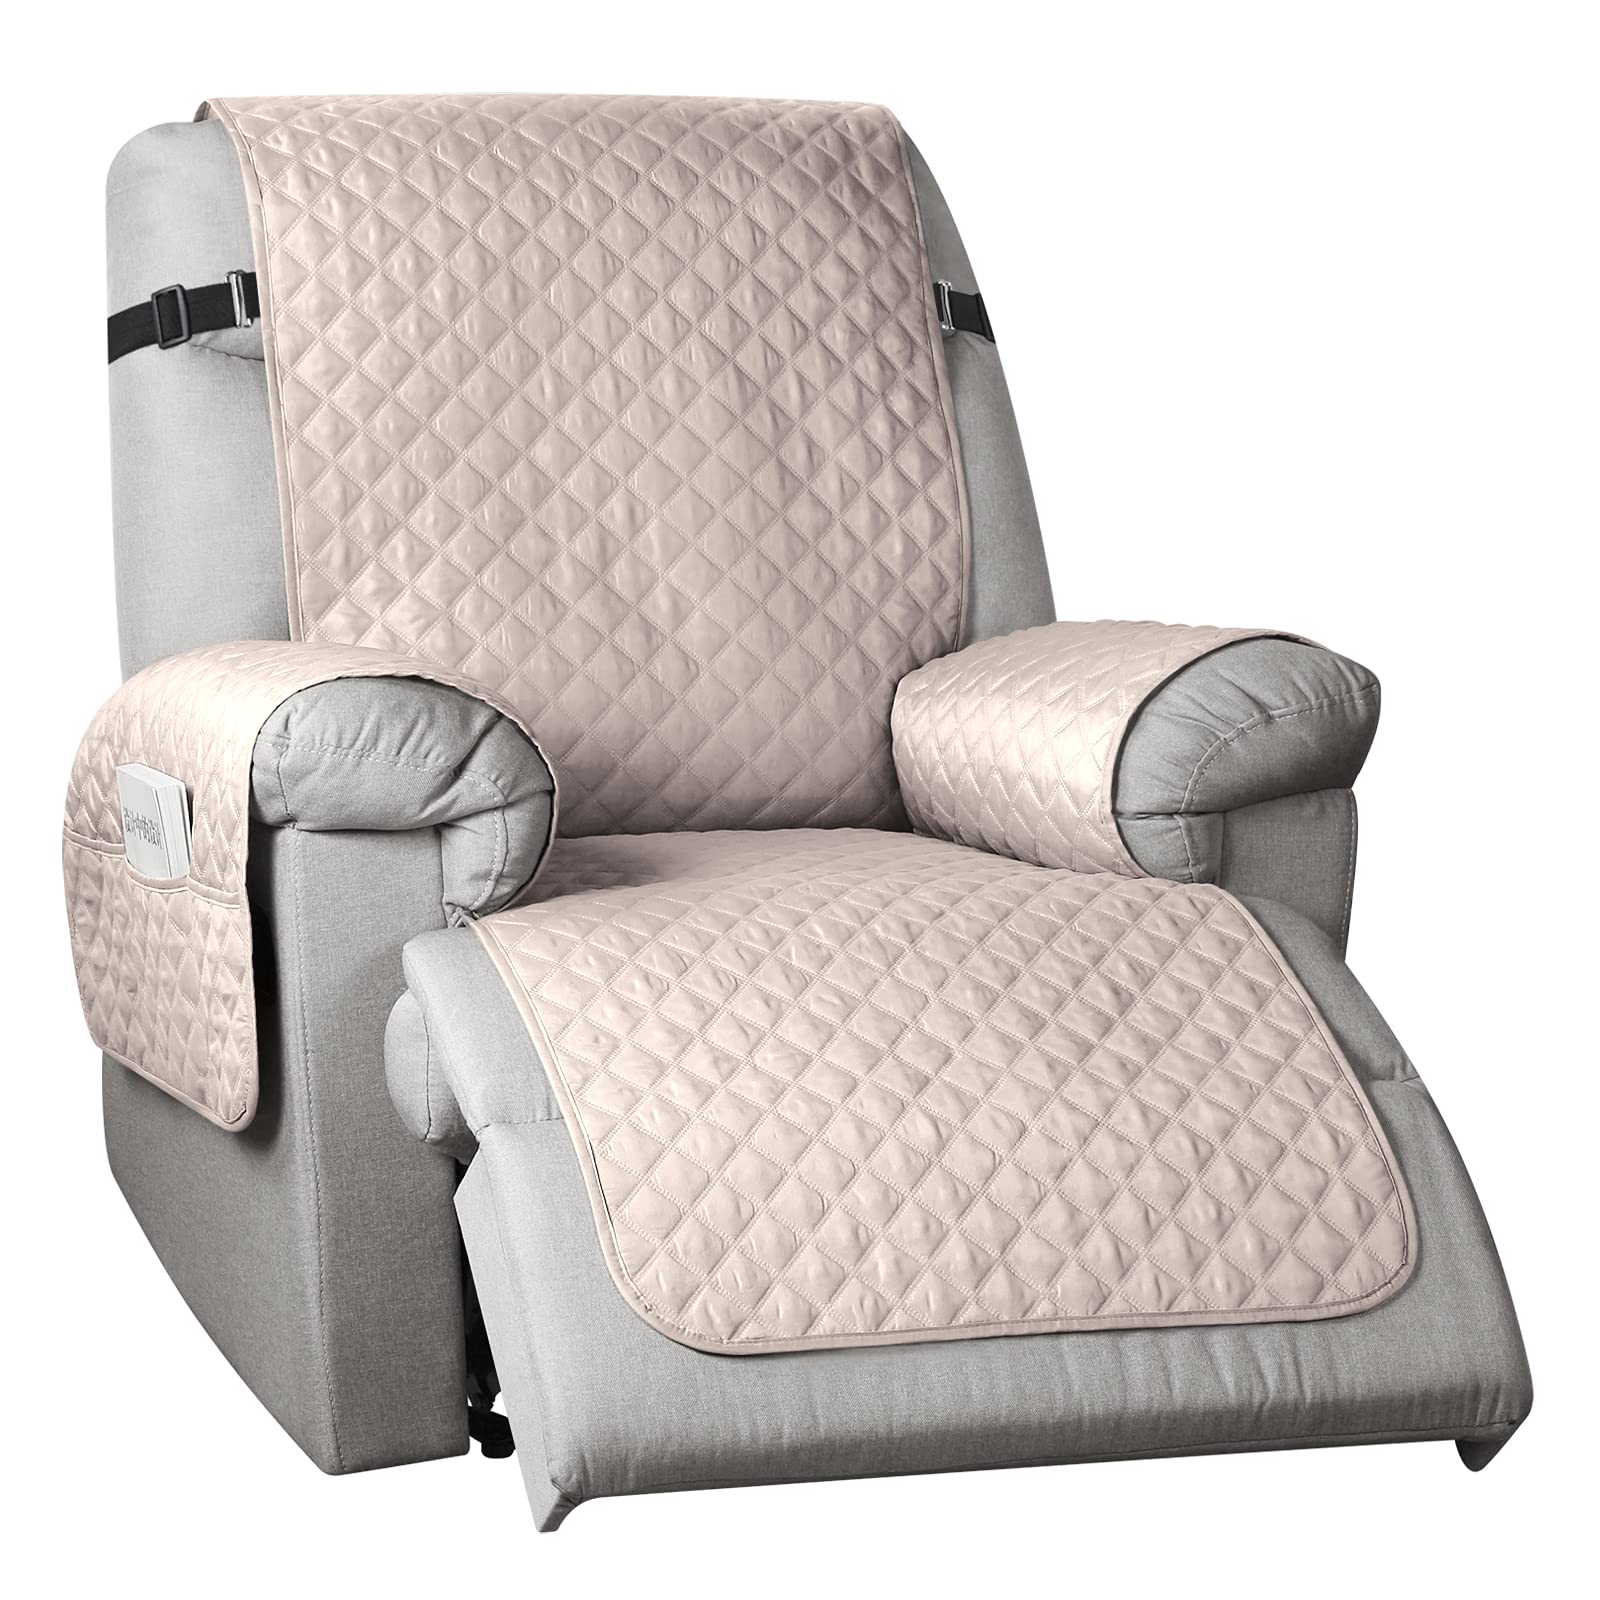 Non-Slip Recliner Chair Cover-Etcy Decor